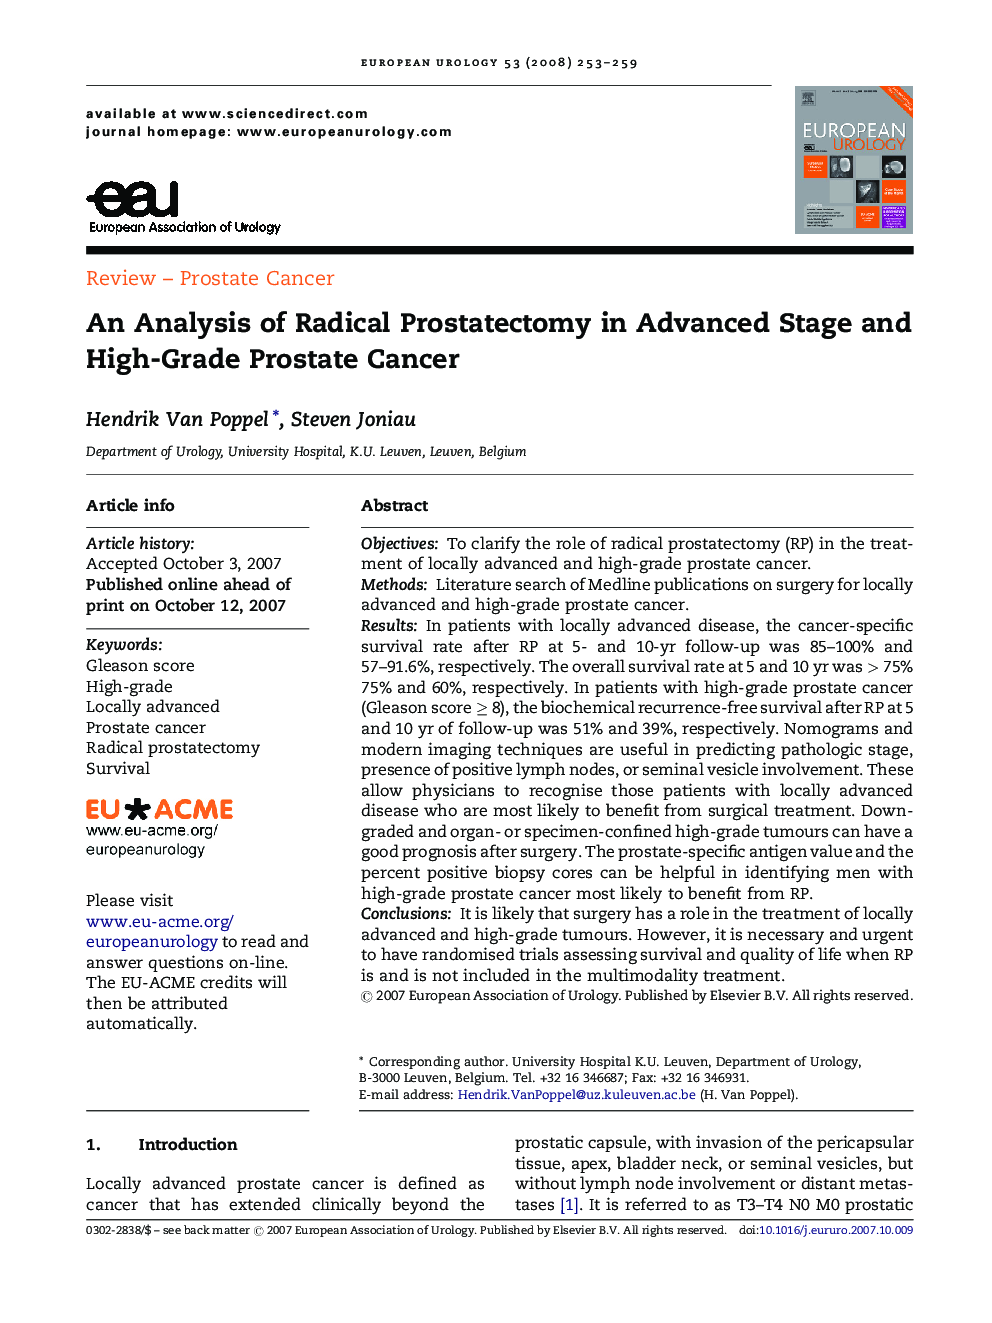 An Analysis of Radical Prostatectomy in Advanced Stage and High-Grade Prostate Cancer 